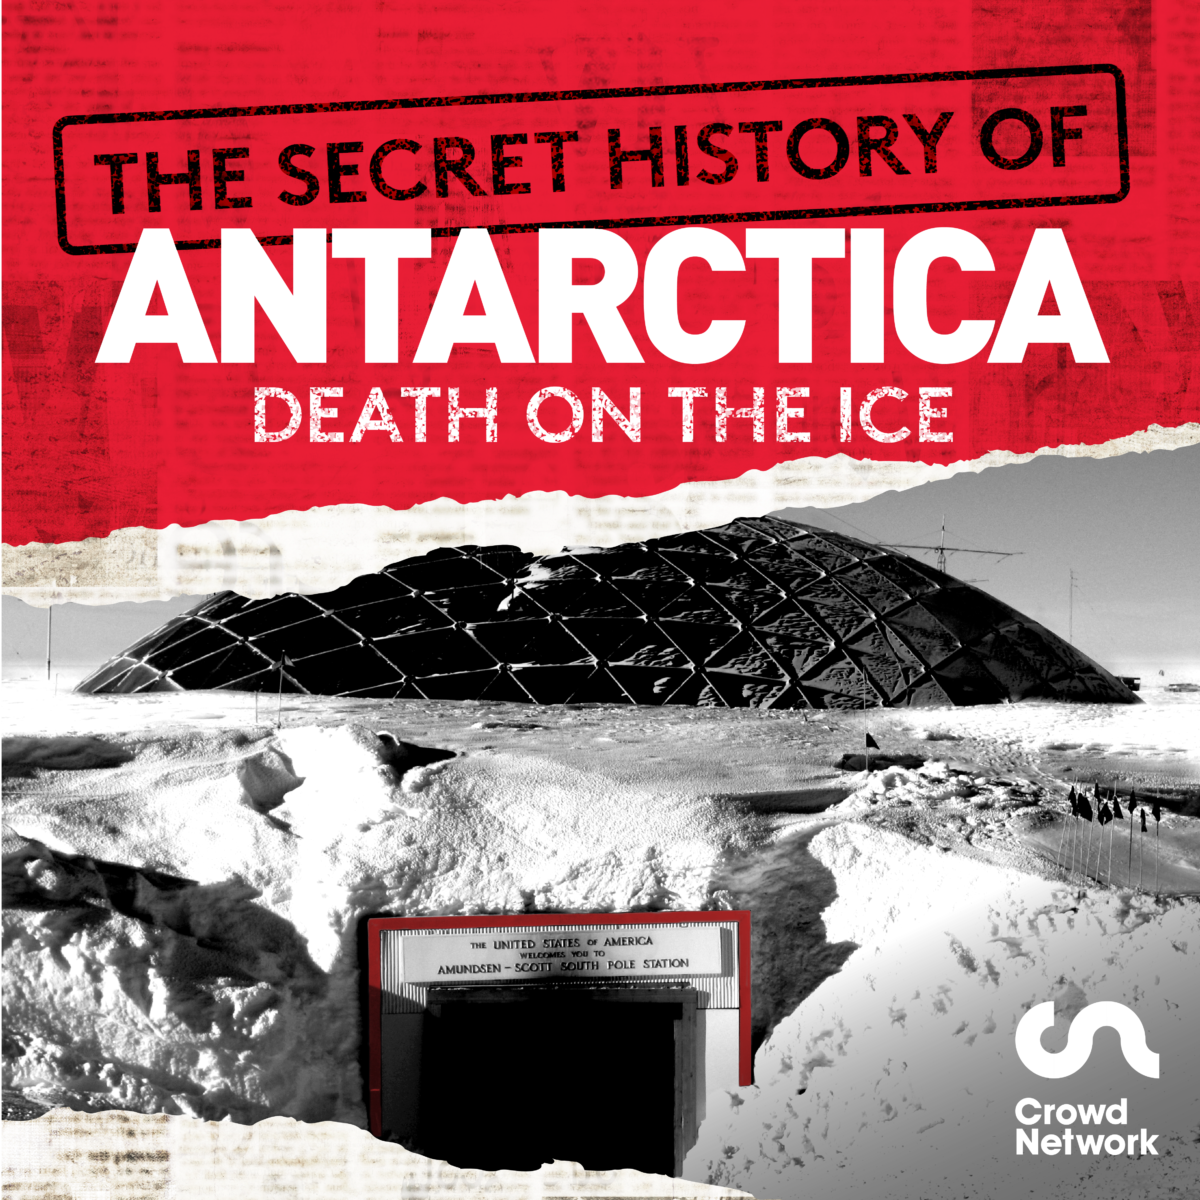 The Secret History of Antarctica. Death on the ice.